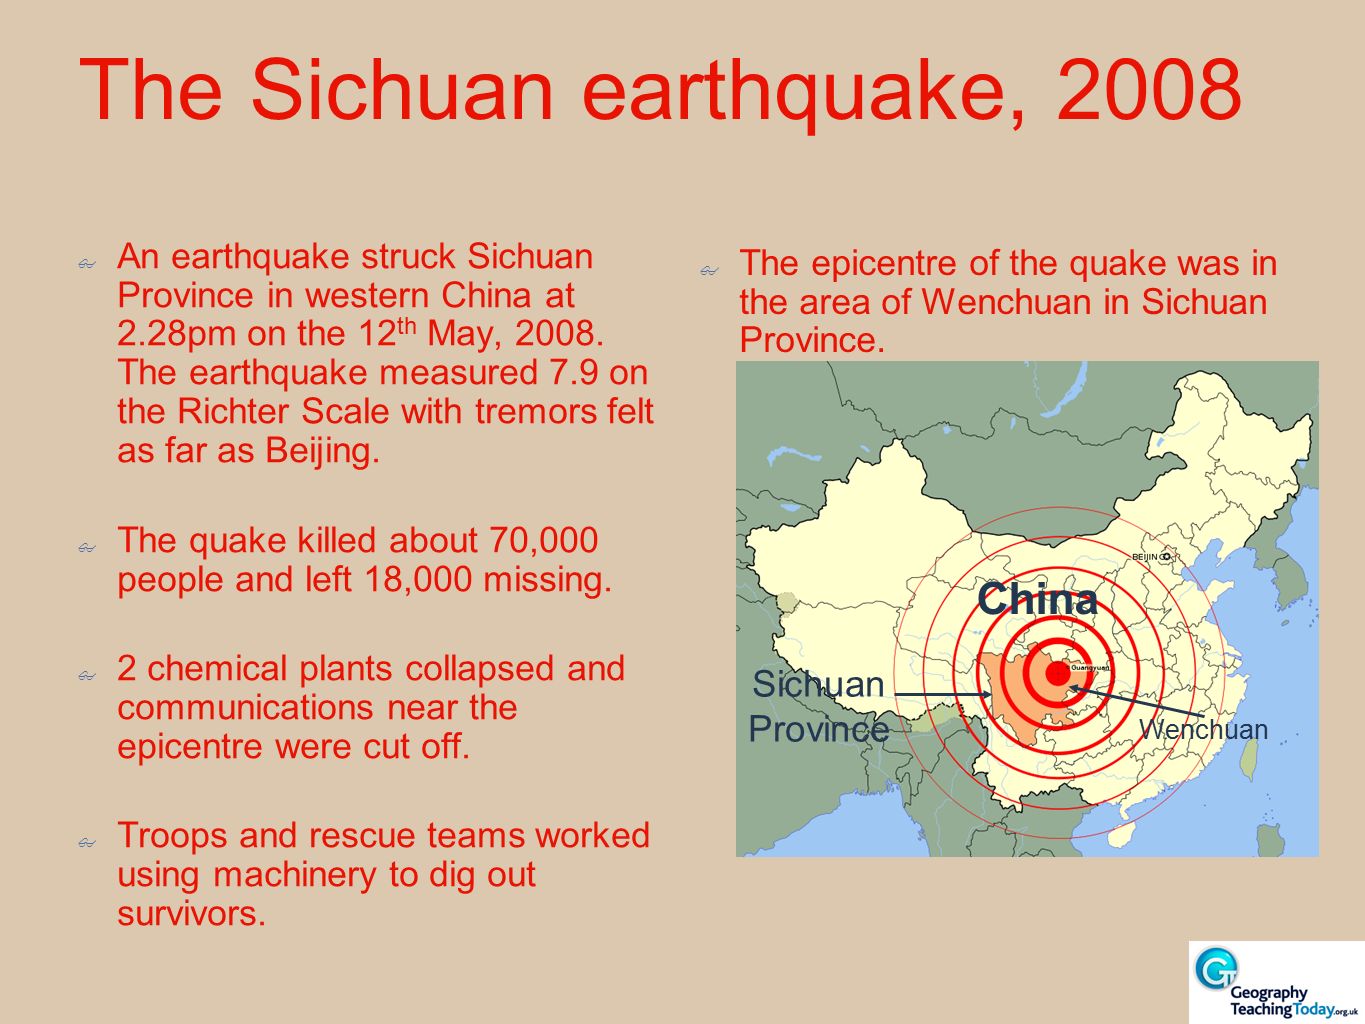 China Earthquakes: Learning from the past Tangshan (1976) & Sichuan (2008) Wikimedia Commons image by miniwiki and licensed for use under the Creative. - ppt download